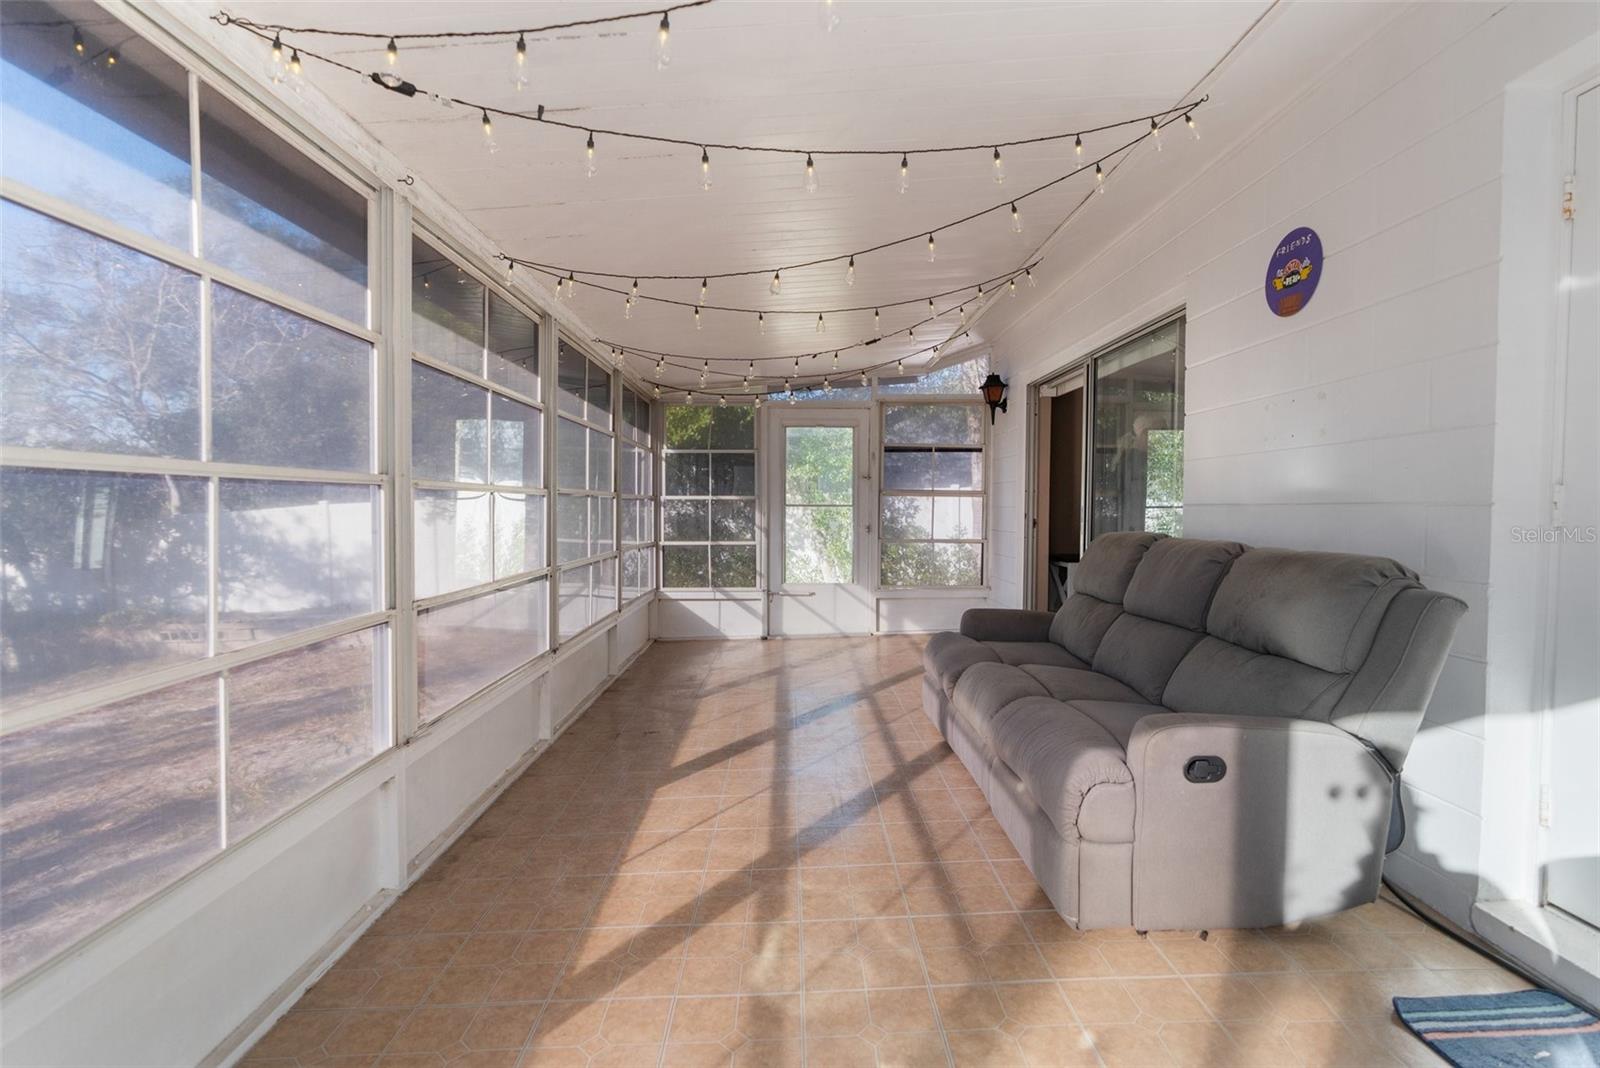 This large enclosed porch with windows that can be removed and this can be a screened in porch